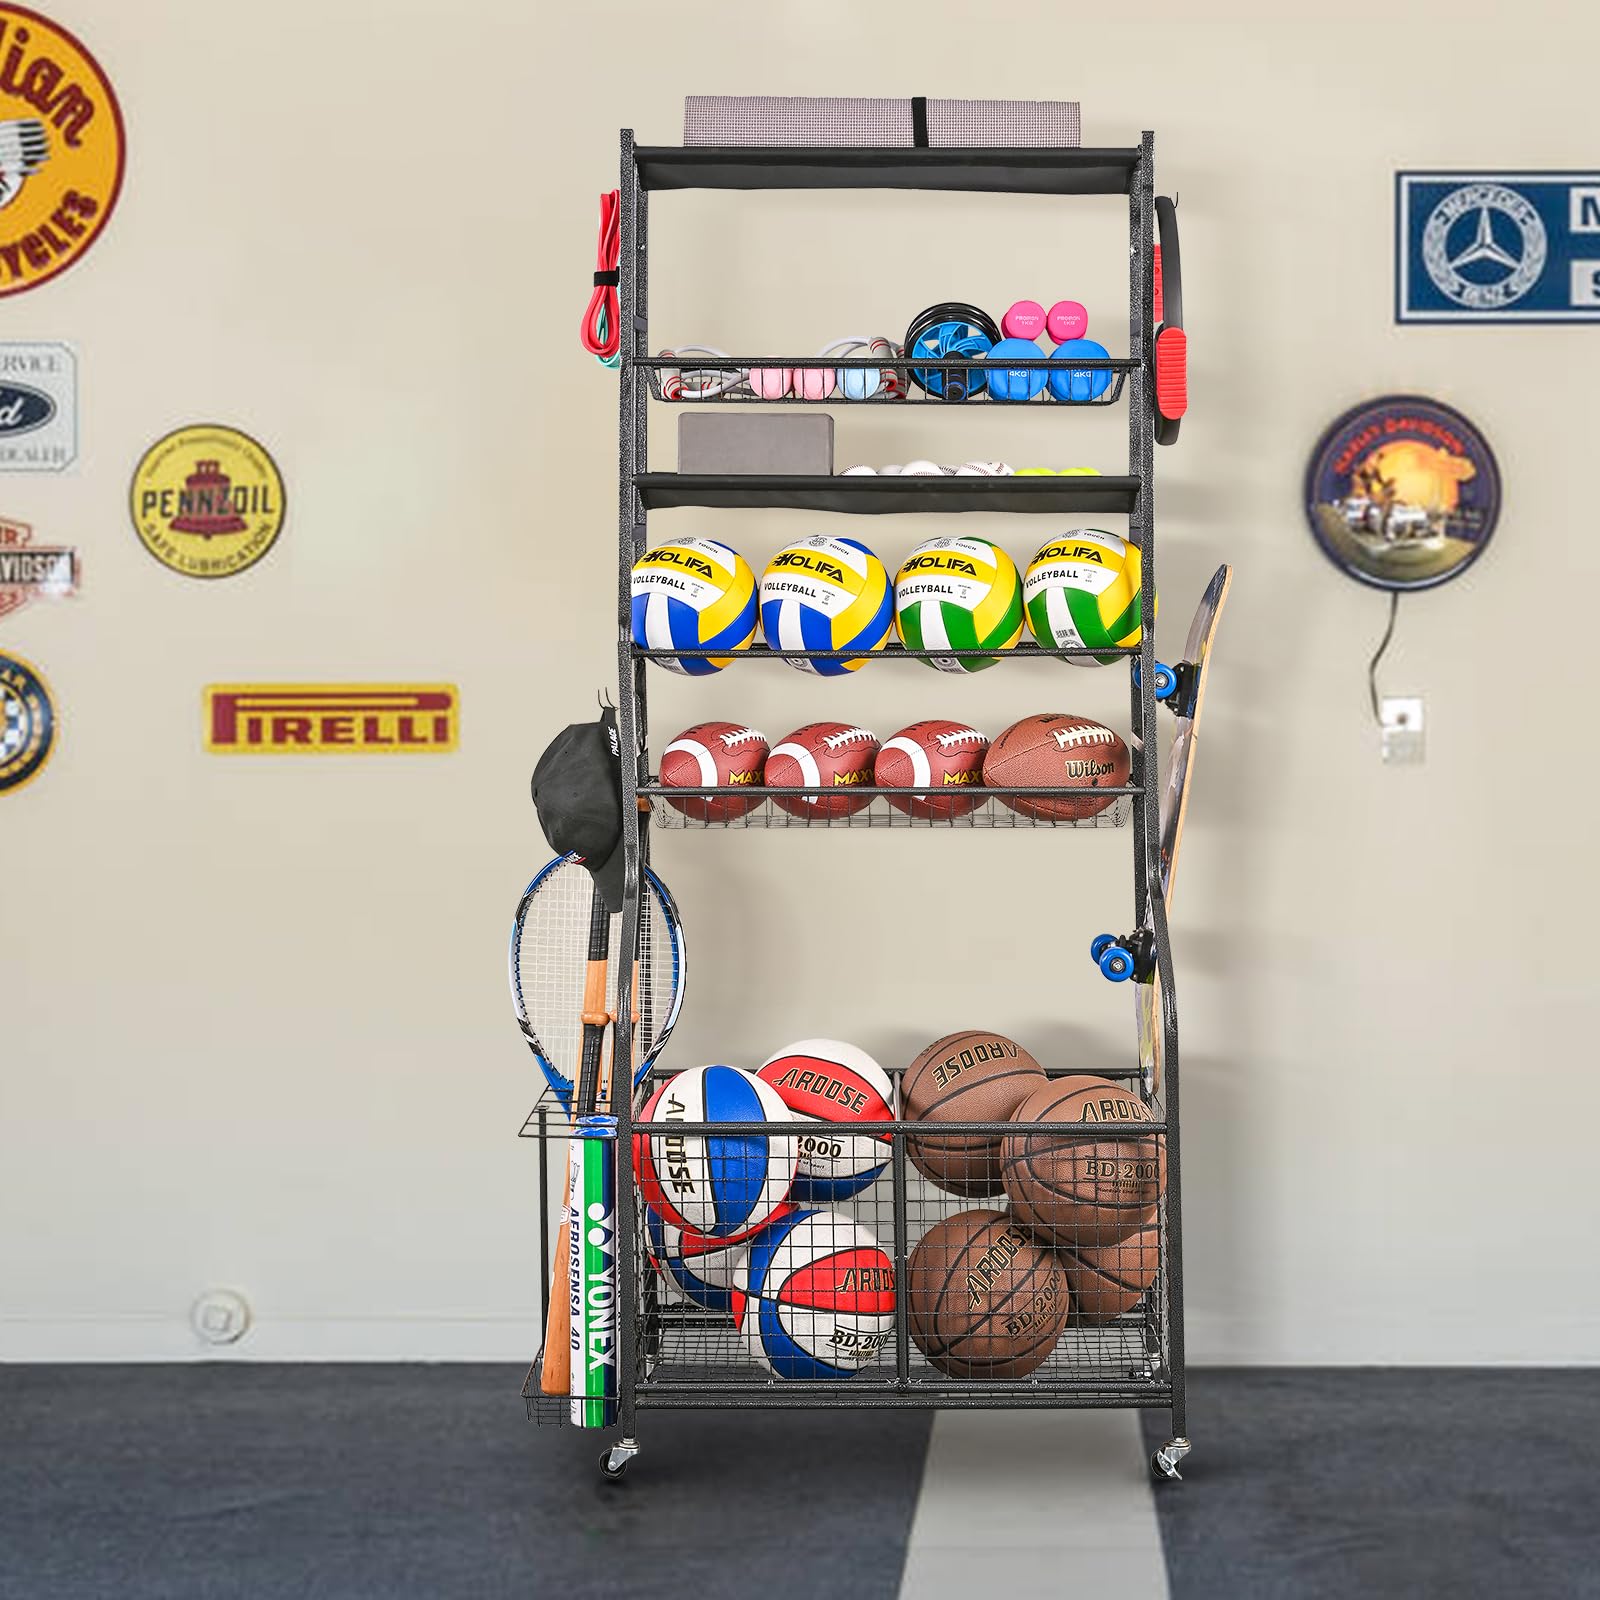 Mythinglogic Sports Equipment Garage Organizer,Garage Ball Storage for Sports Gear and Toys, Rolling Ball Cart with Wheels for Indoor/Outdoor Use